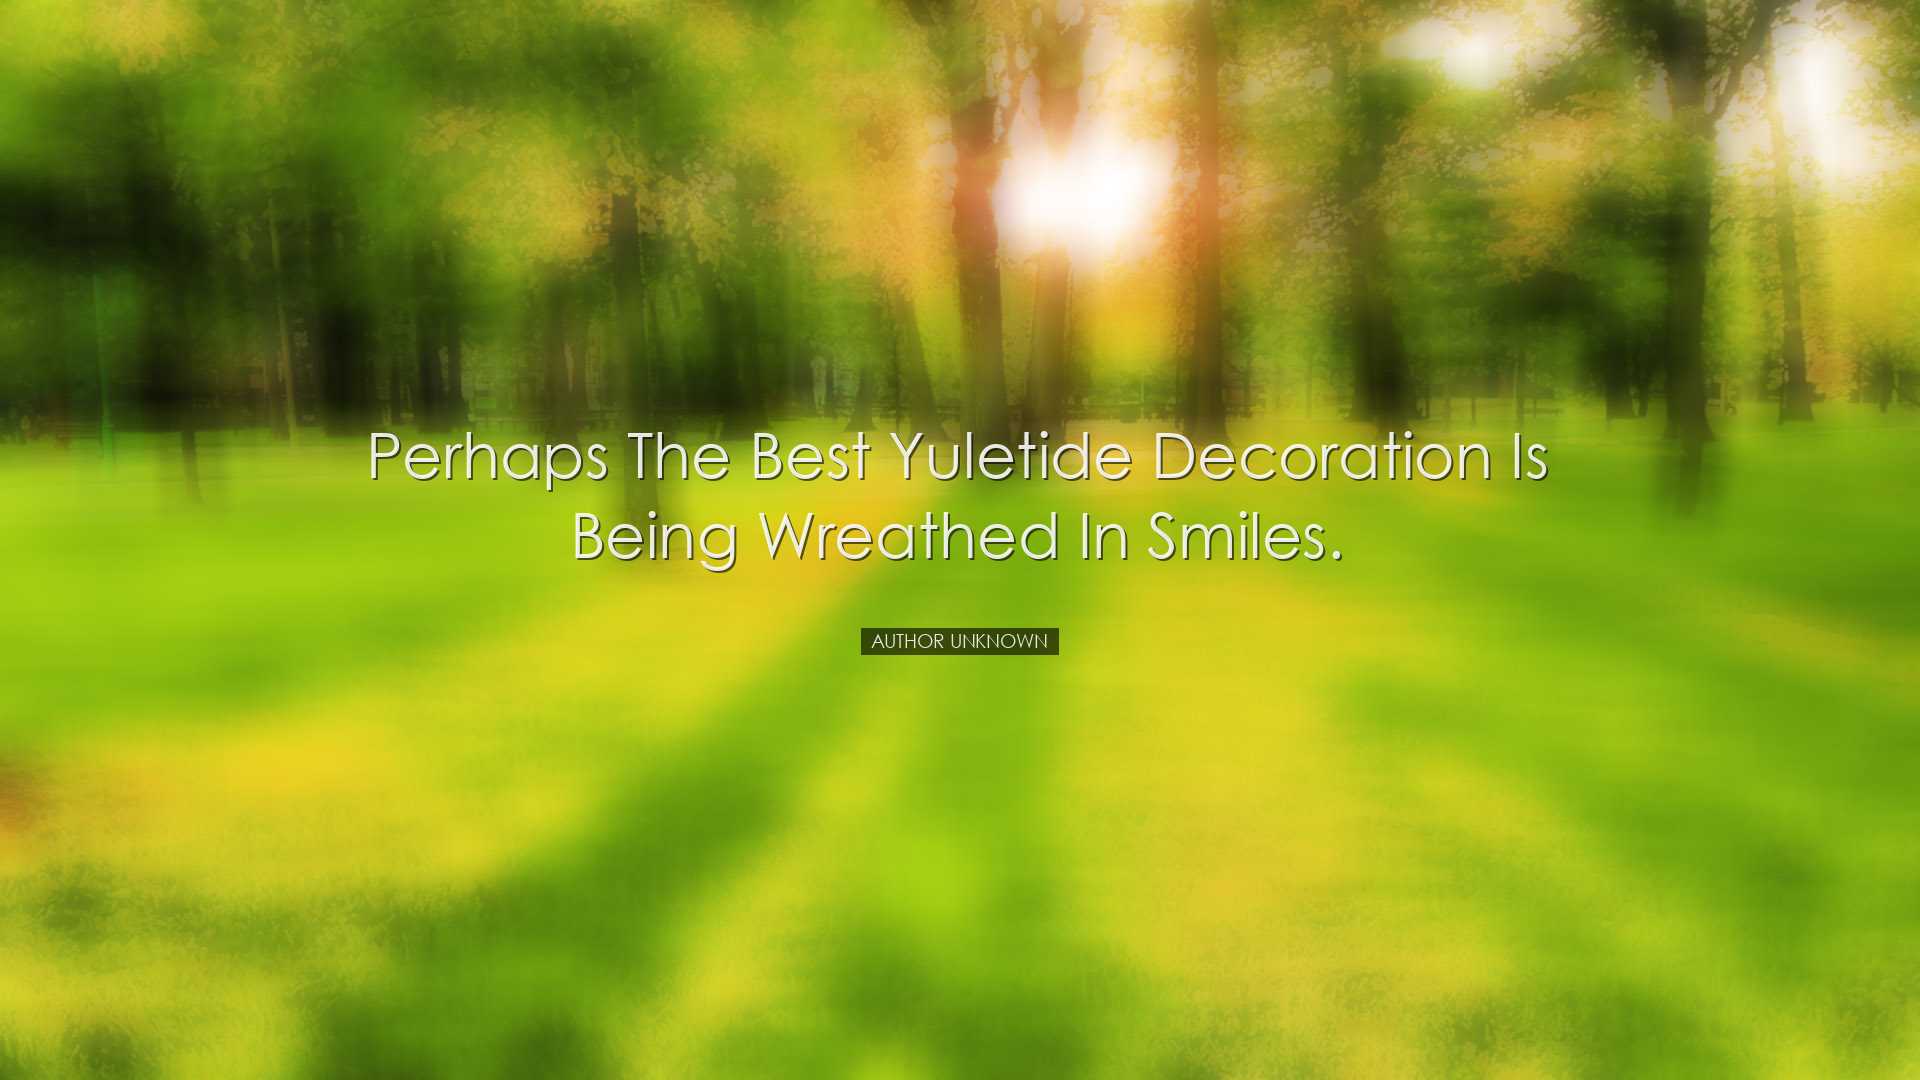 Perhaps the best Yuletide decoration is being wreathed in smiles.